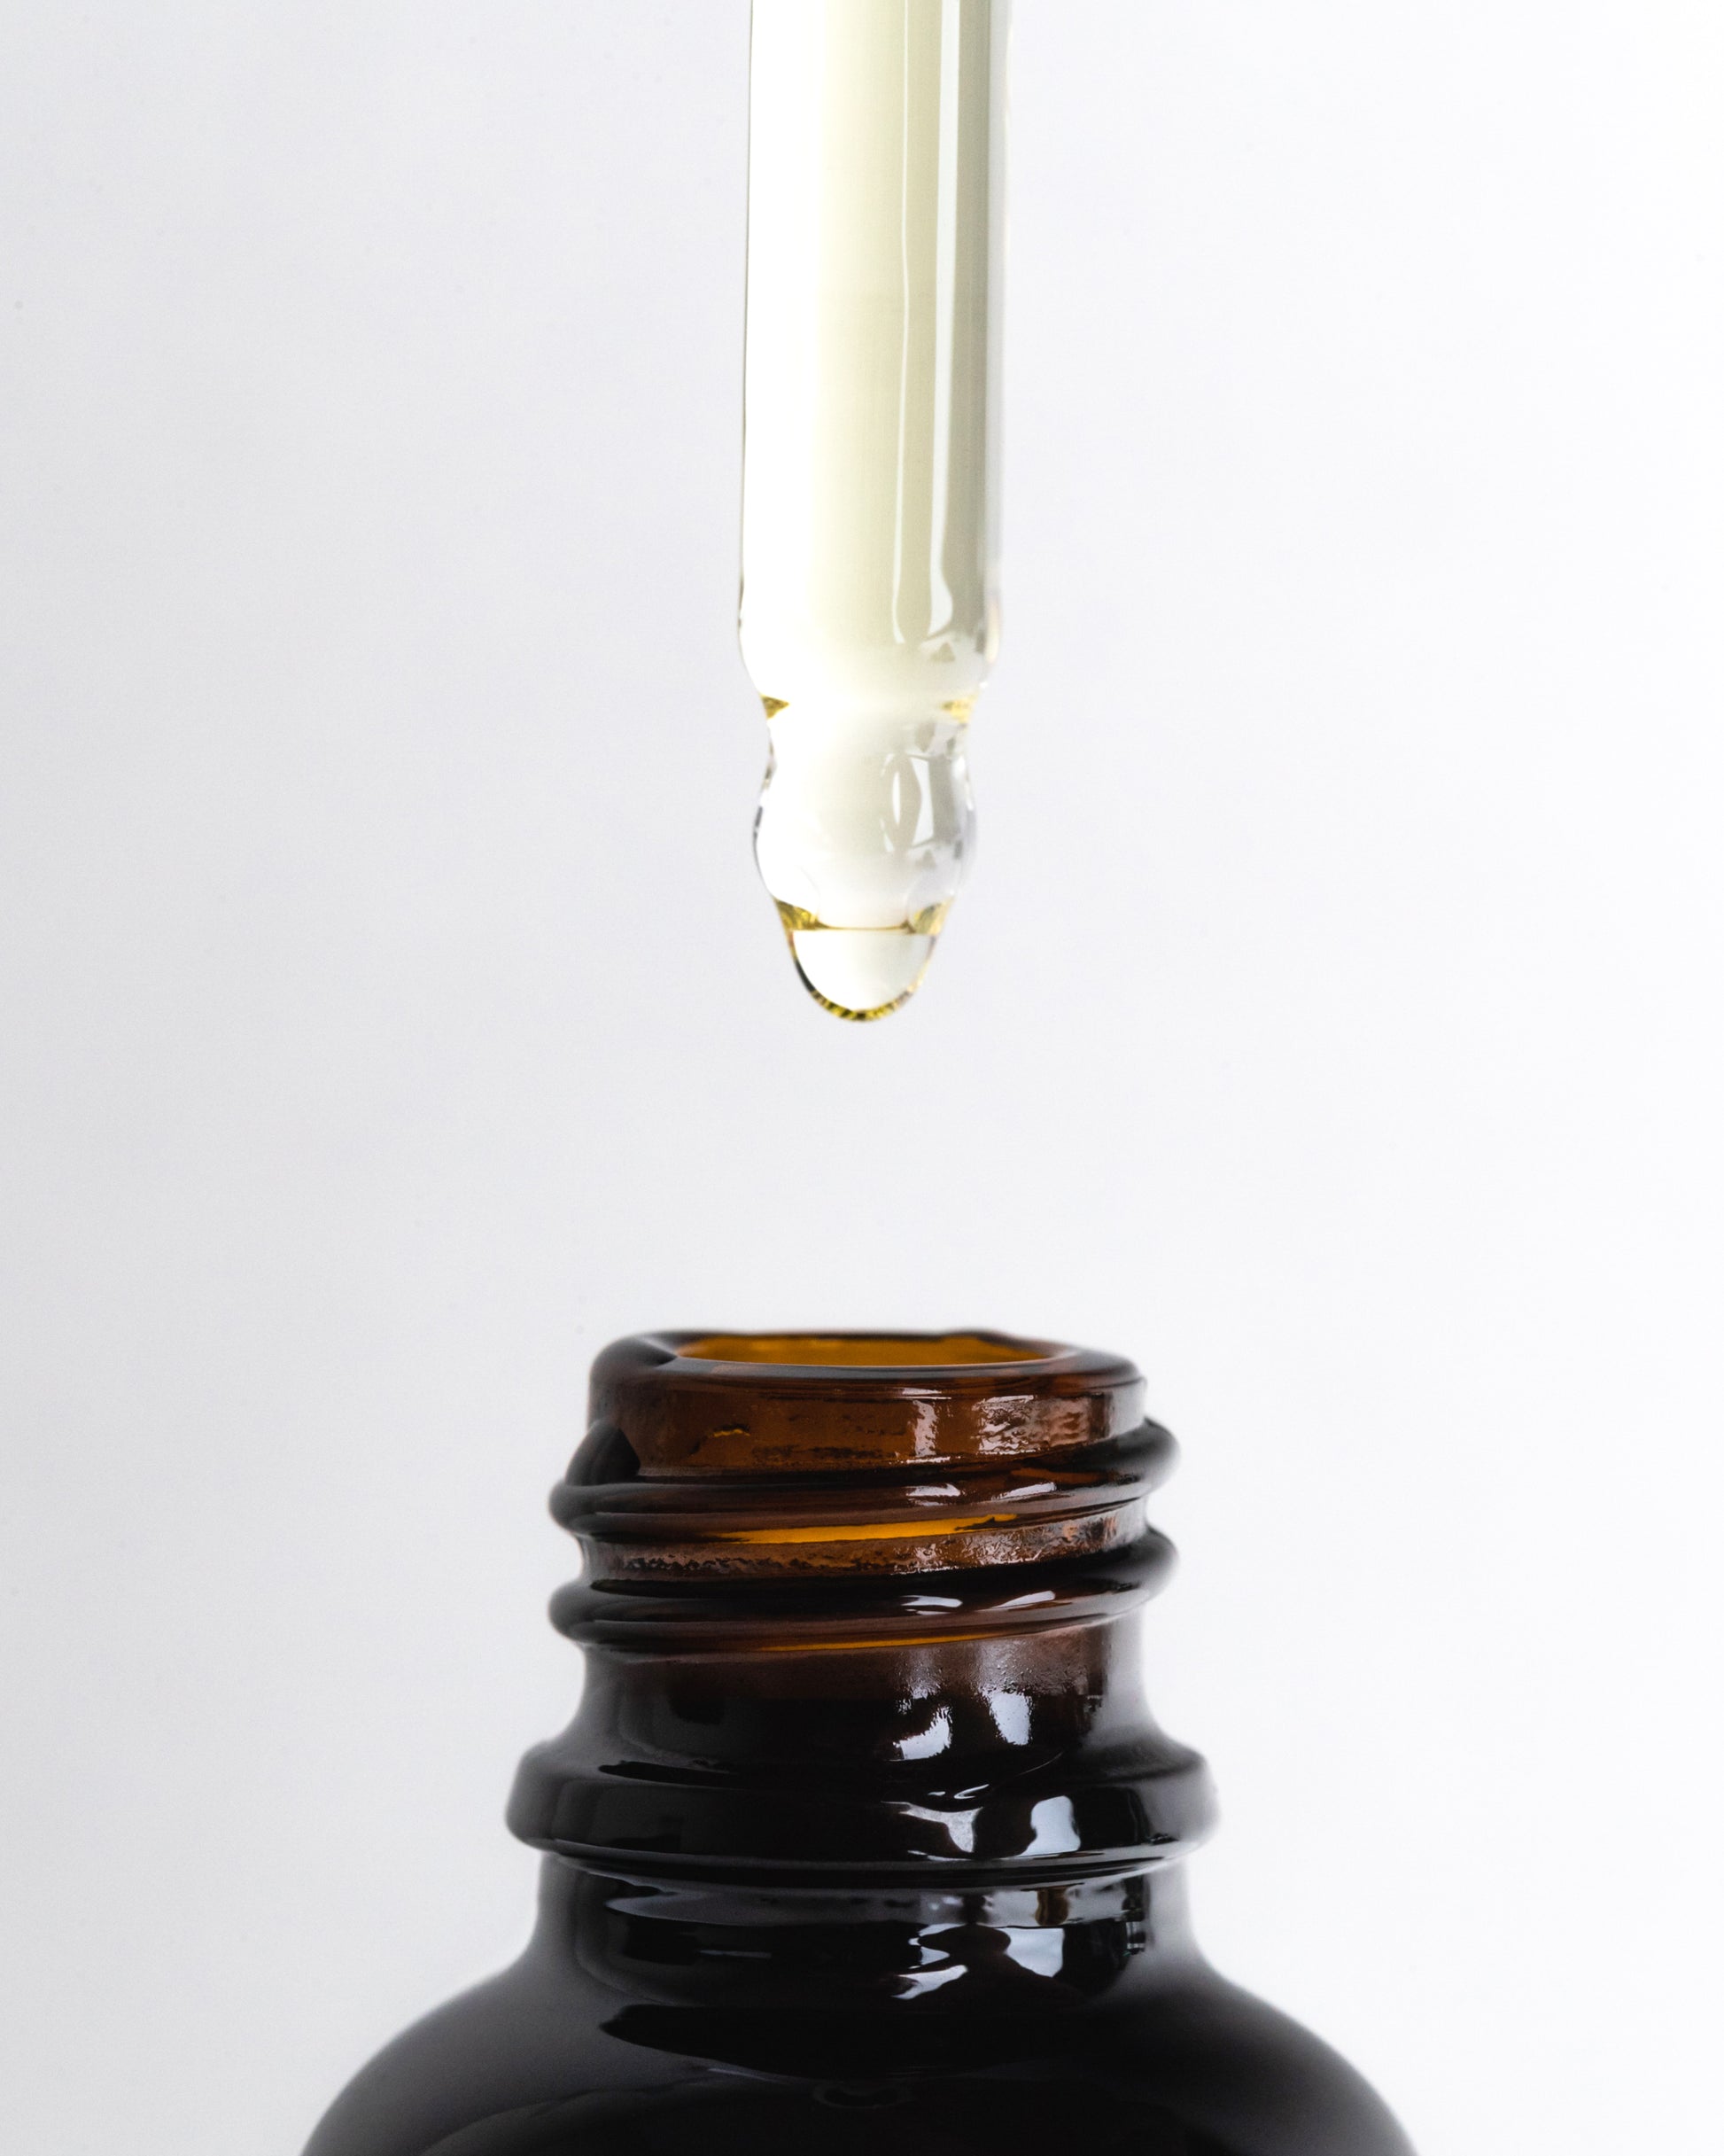 Dosing CBD Oils with Standard Droppers 